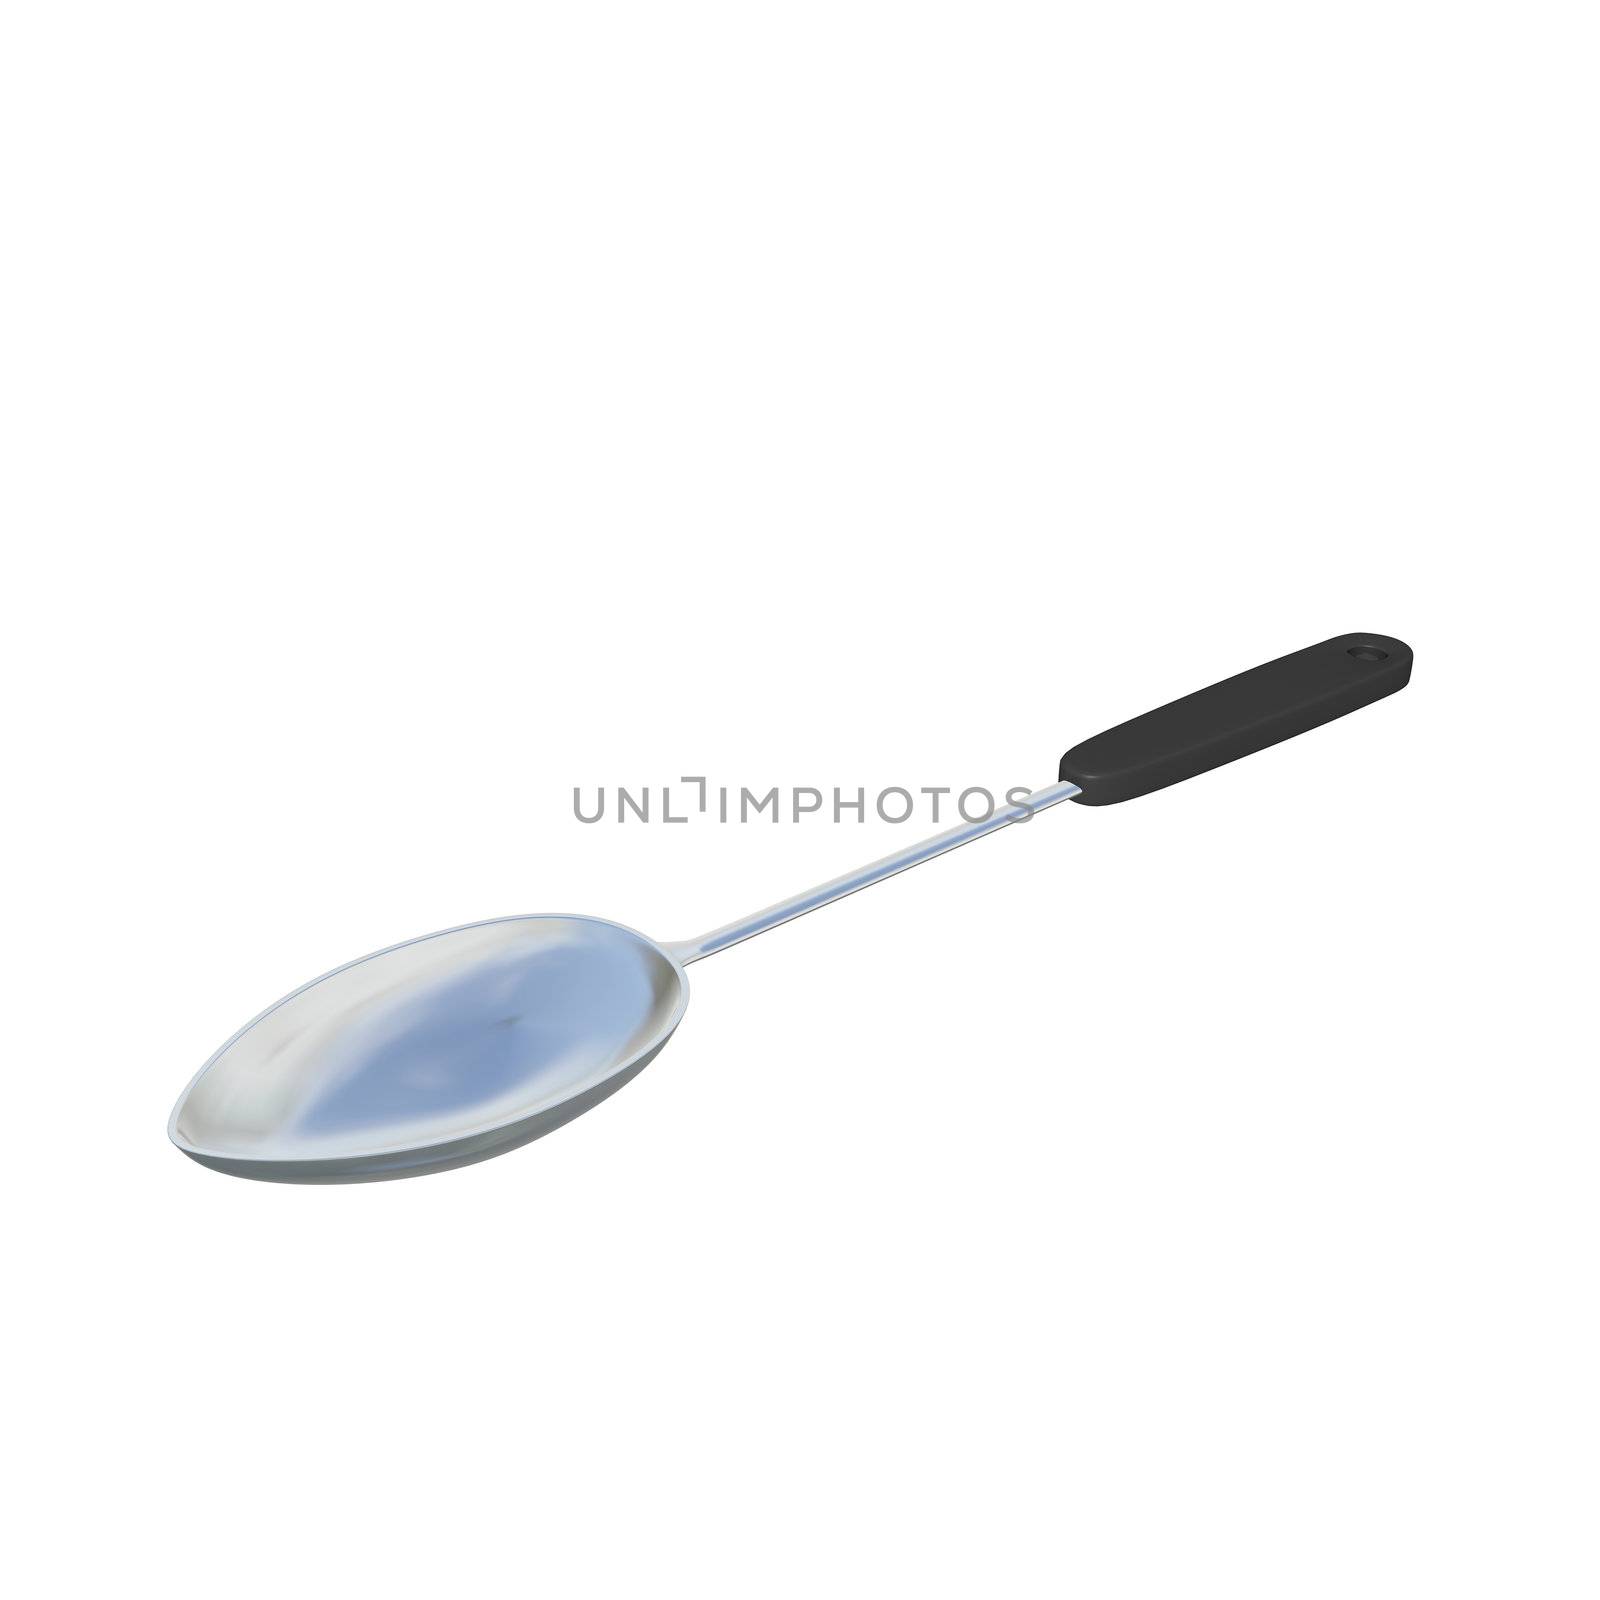 Stainless steel spoon laddle with black handle, 3D illustration by Morphart